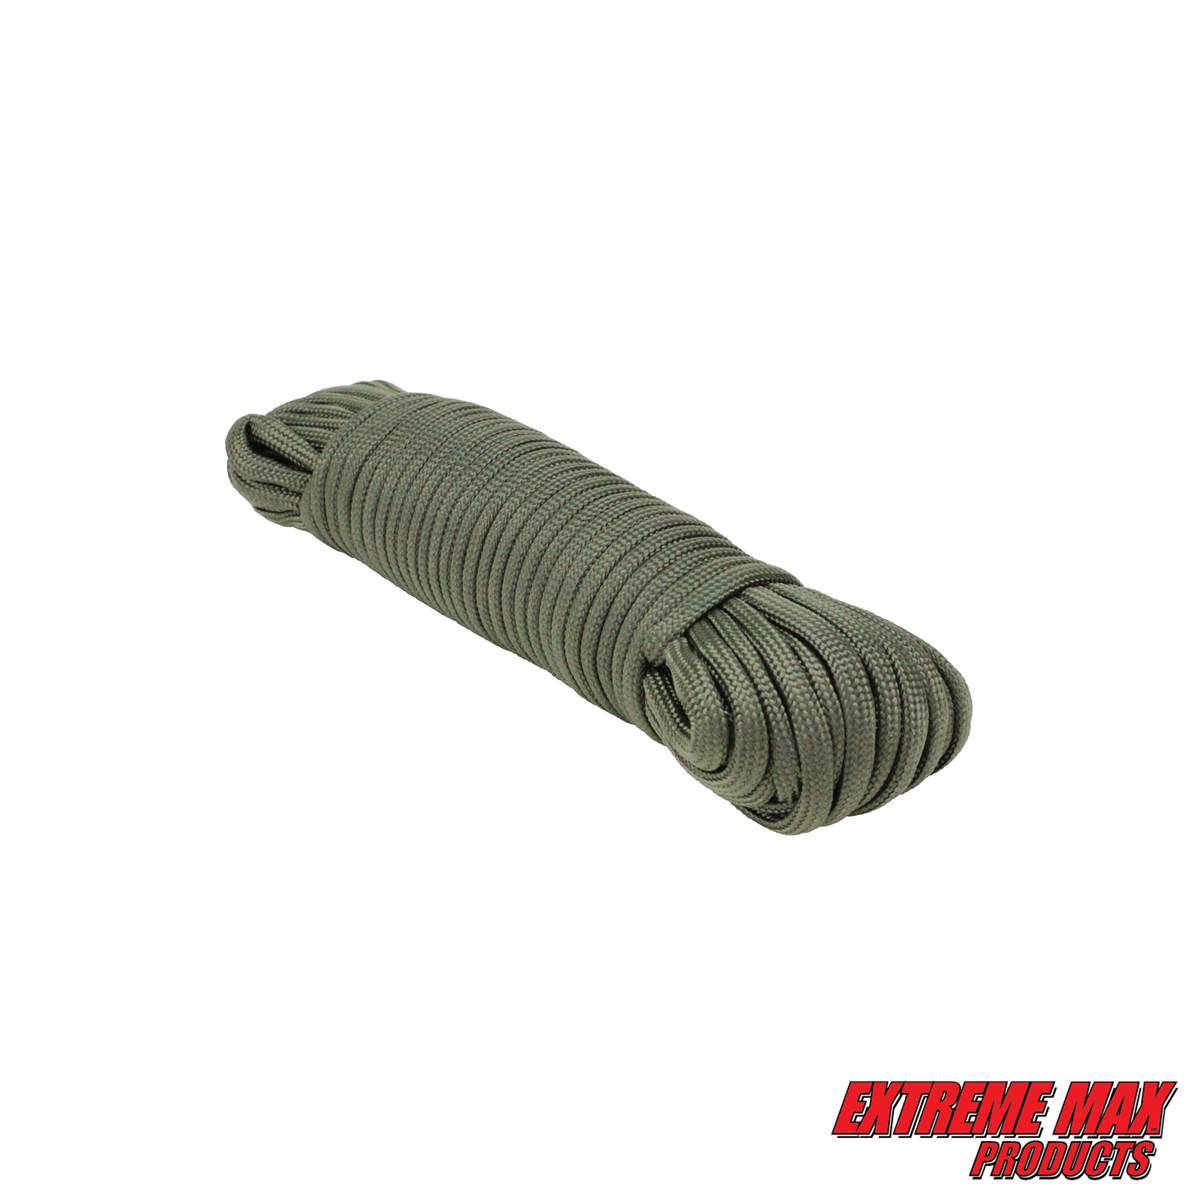 Extreme Max 3008.0484 Type III 550 Paracord - 5/32 x 250', OD Green